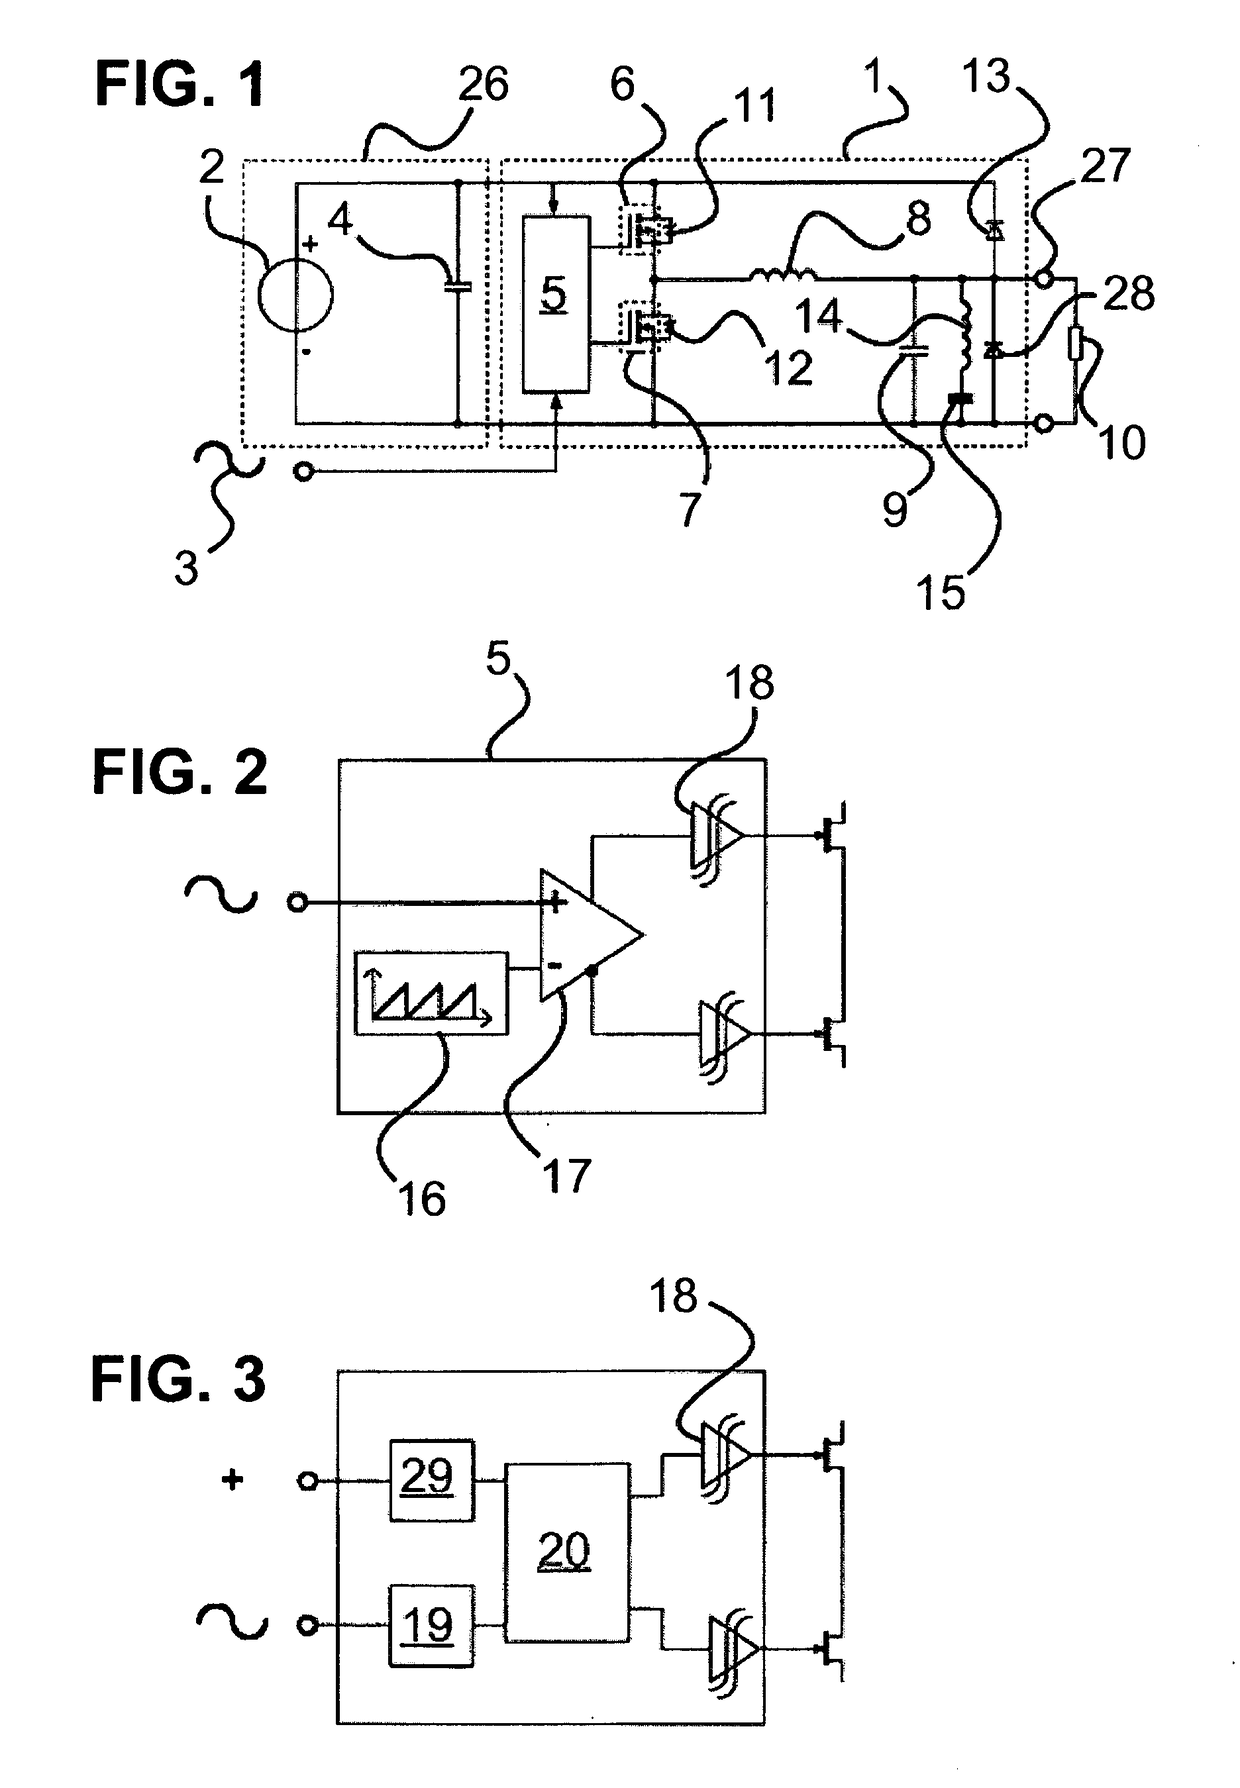 Voltage source for modulated DC voltages